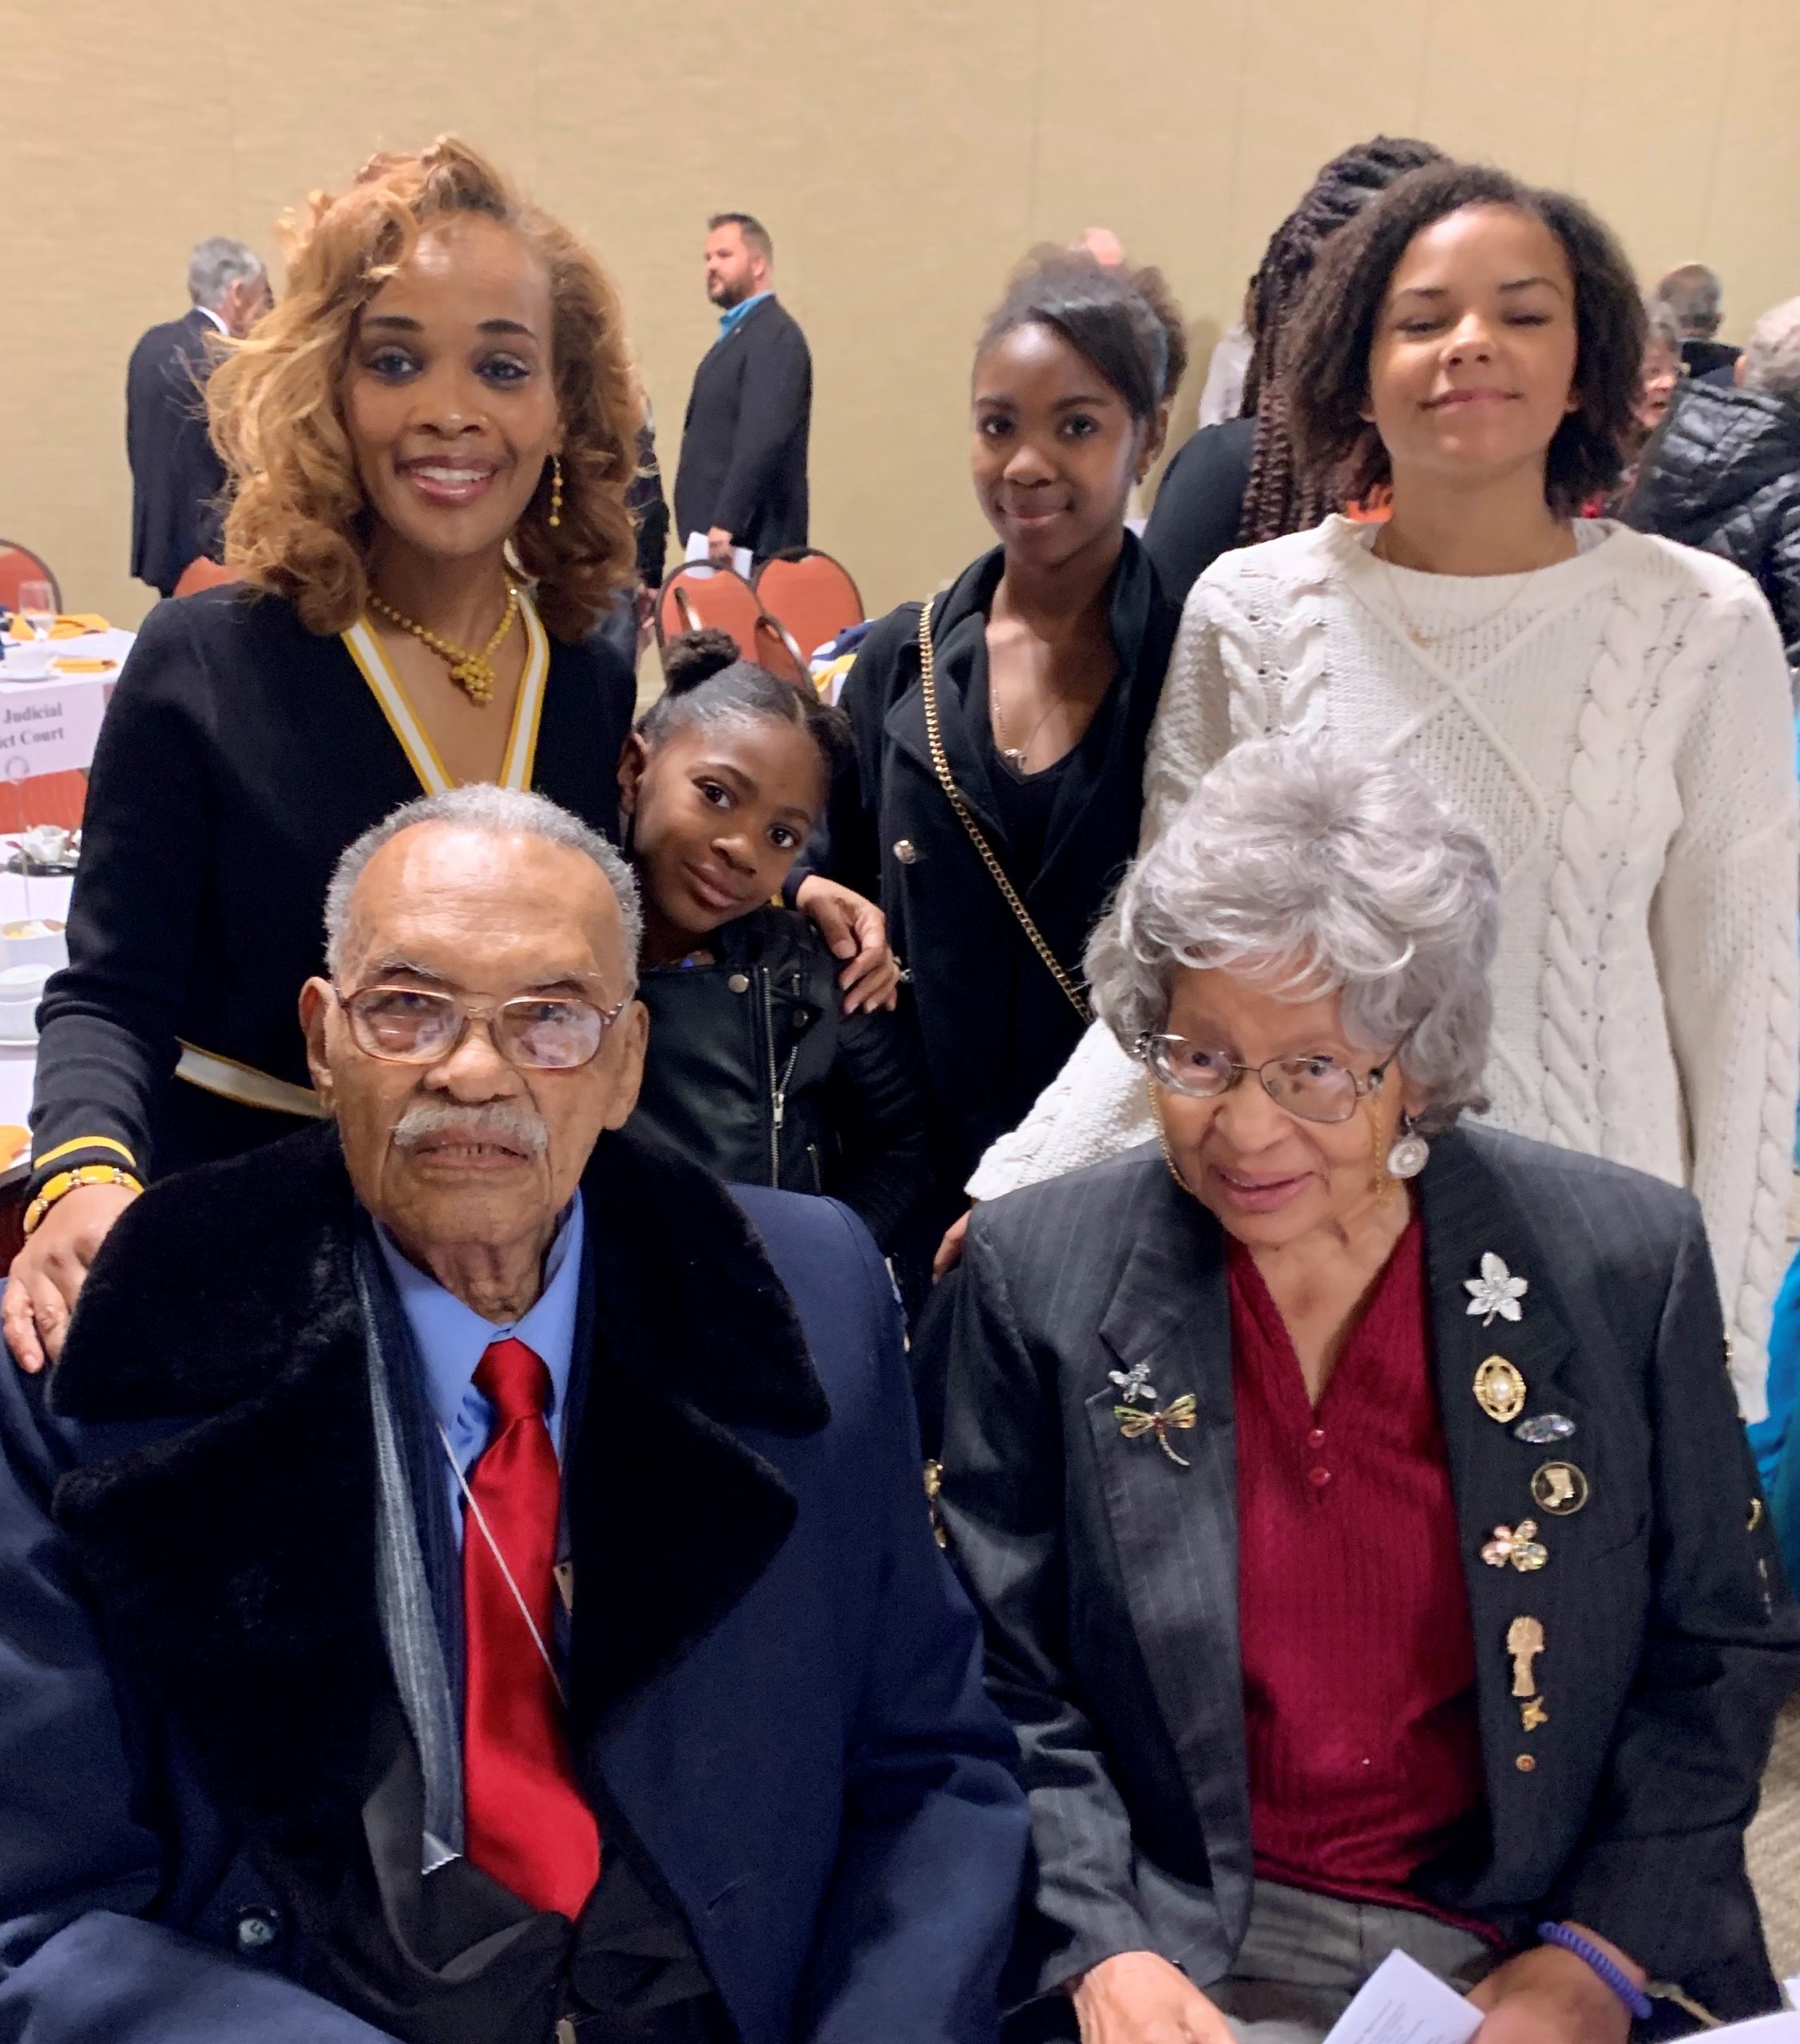 Director of Black Programs poses for a photo with attendees of the Martin Luther King, Jr. celebration